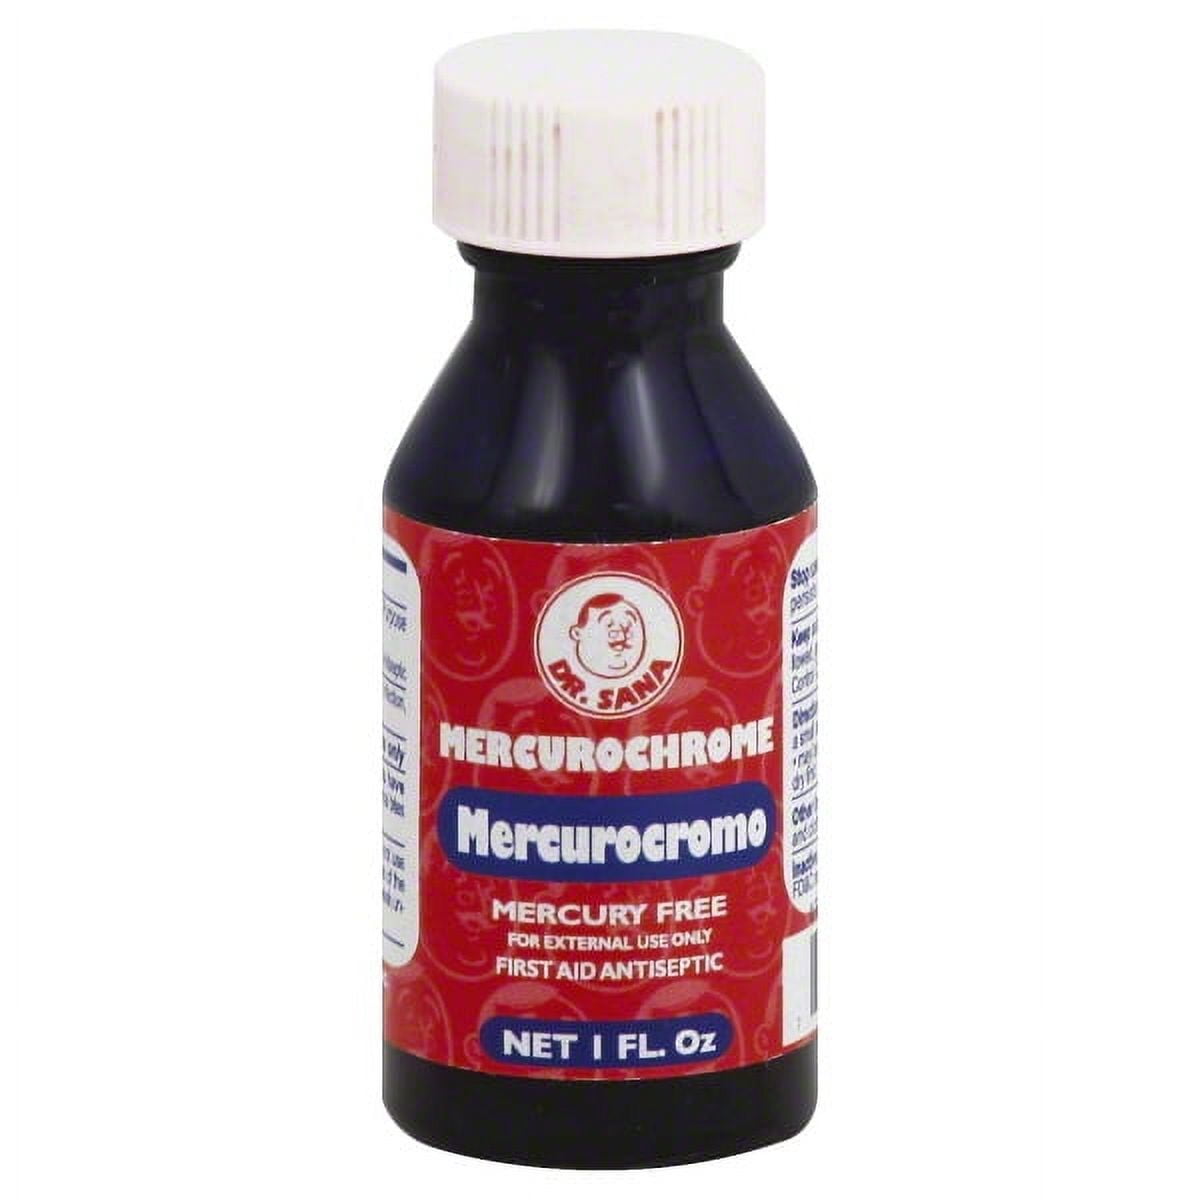 Germa MercuroChrome. First Aid Antiseptic. For Minor Wounds. 1 Oz. Pack of 6